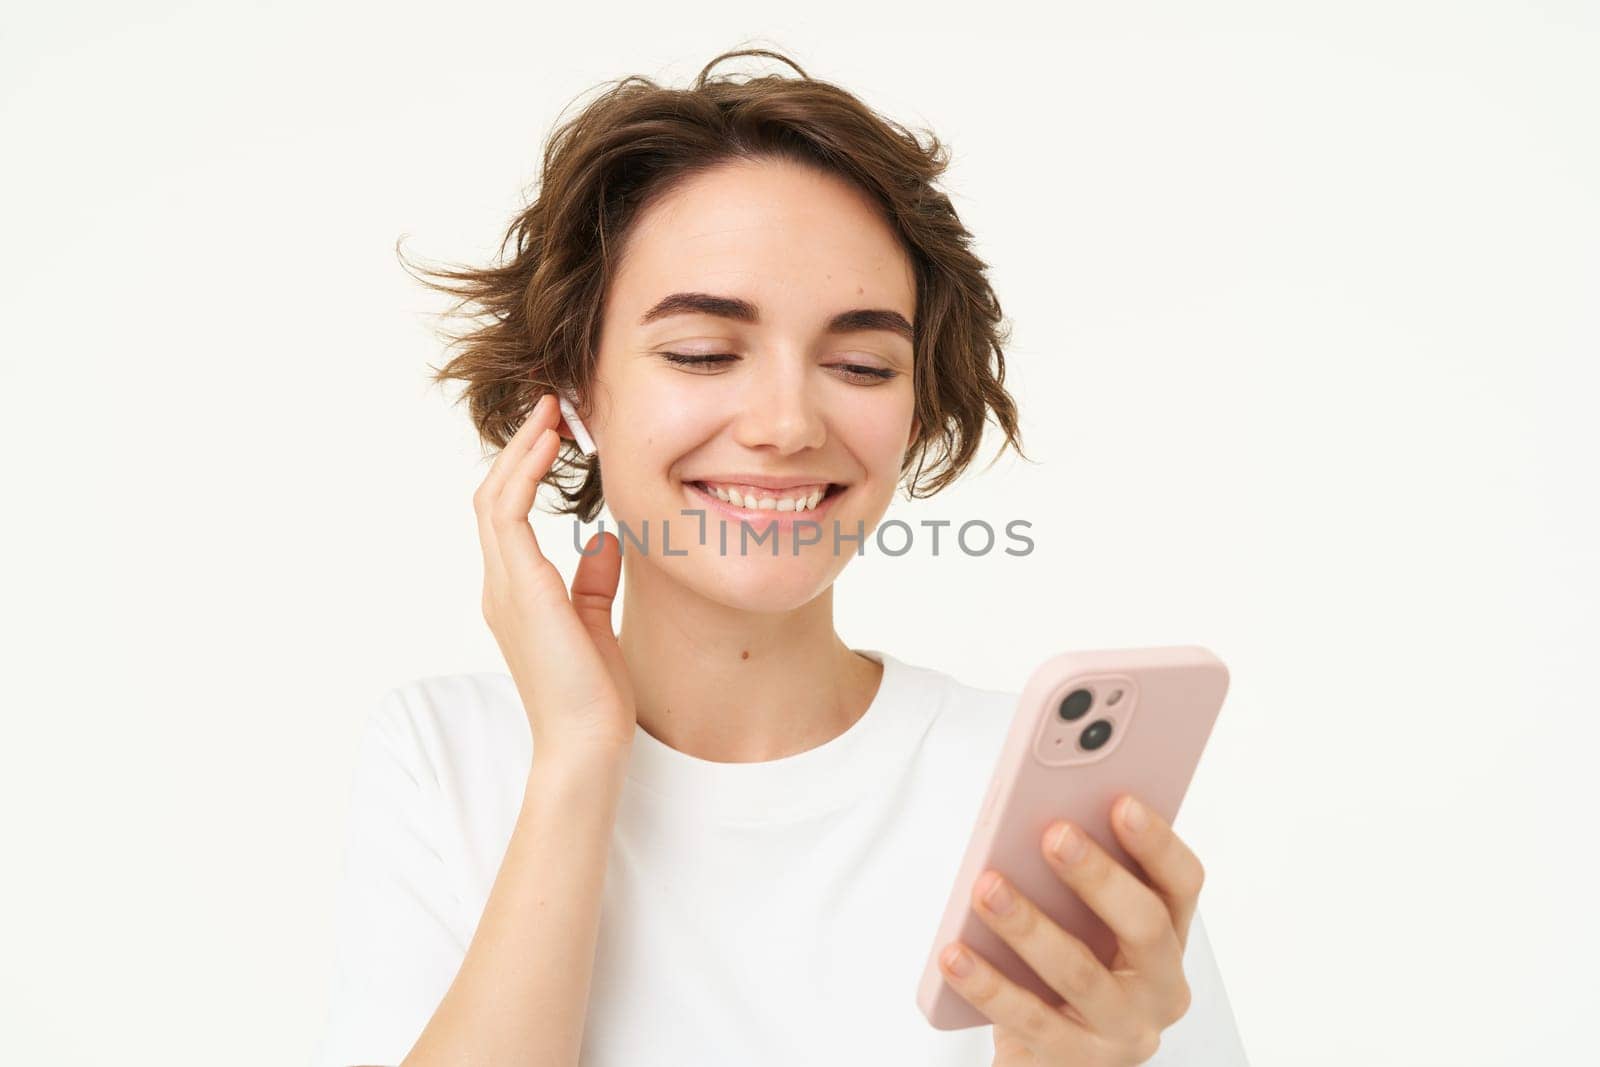 Woman singing along, listening music in wireless headphones, holding smartphone in hand, standing over white background.